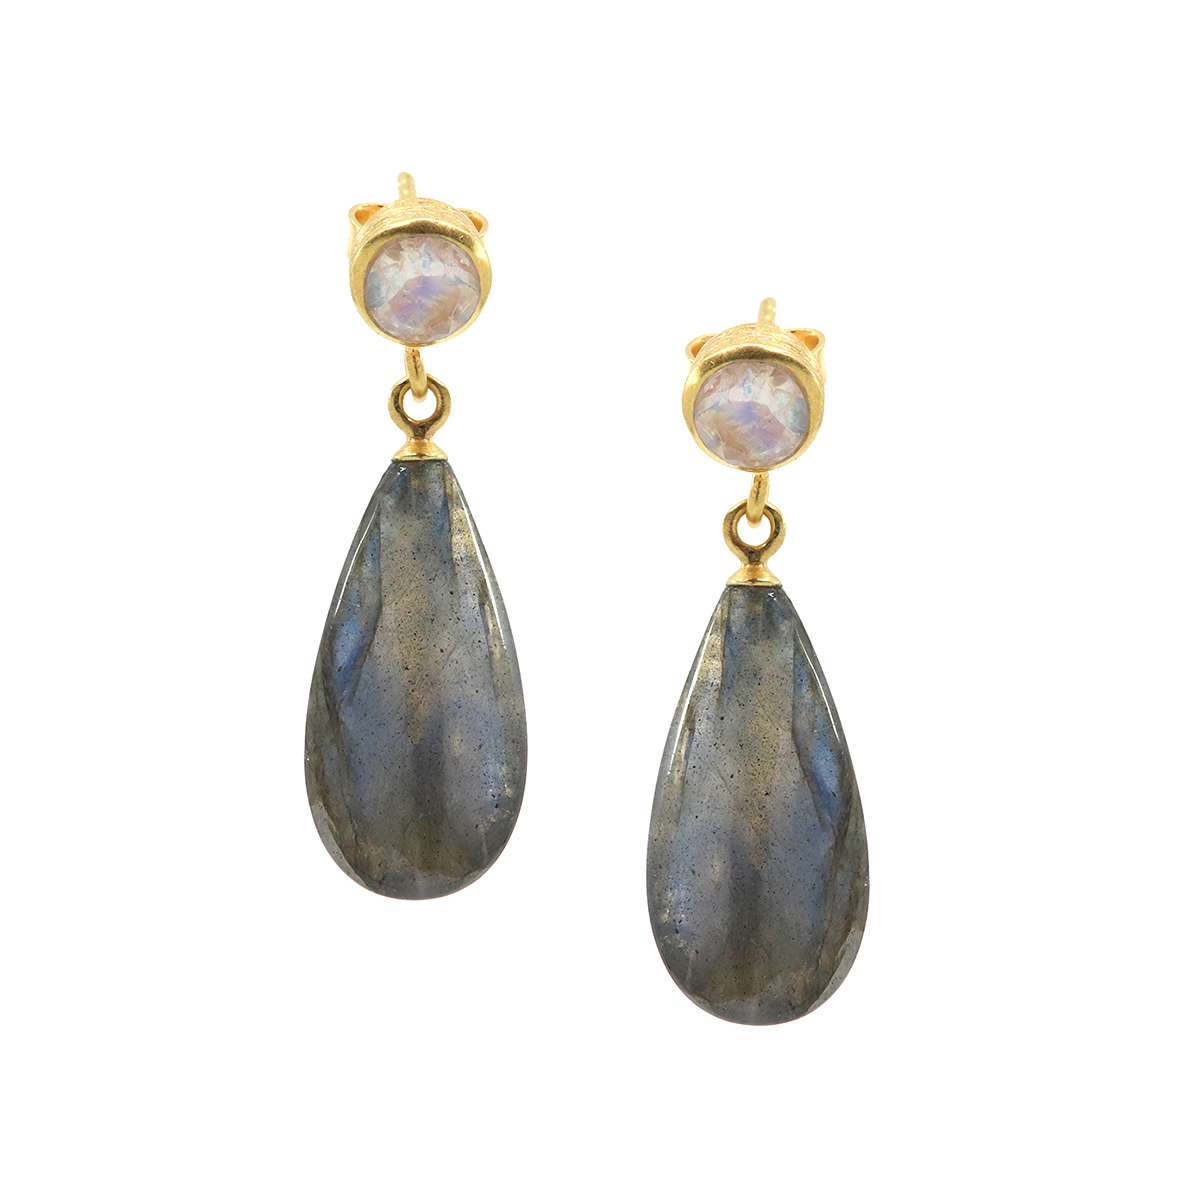 Gold Plated Sterling Silver Labradorite and Moonstone Earrings